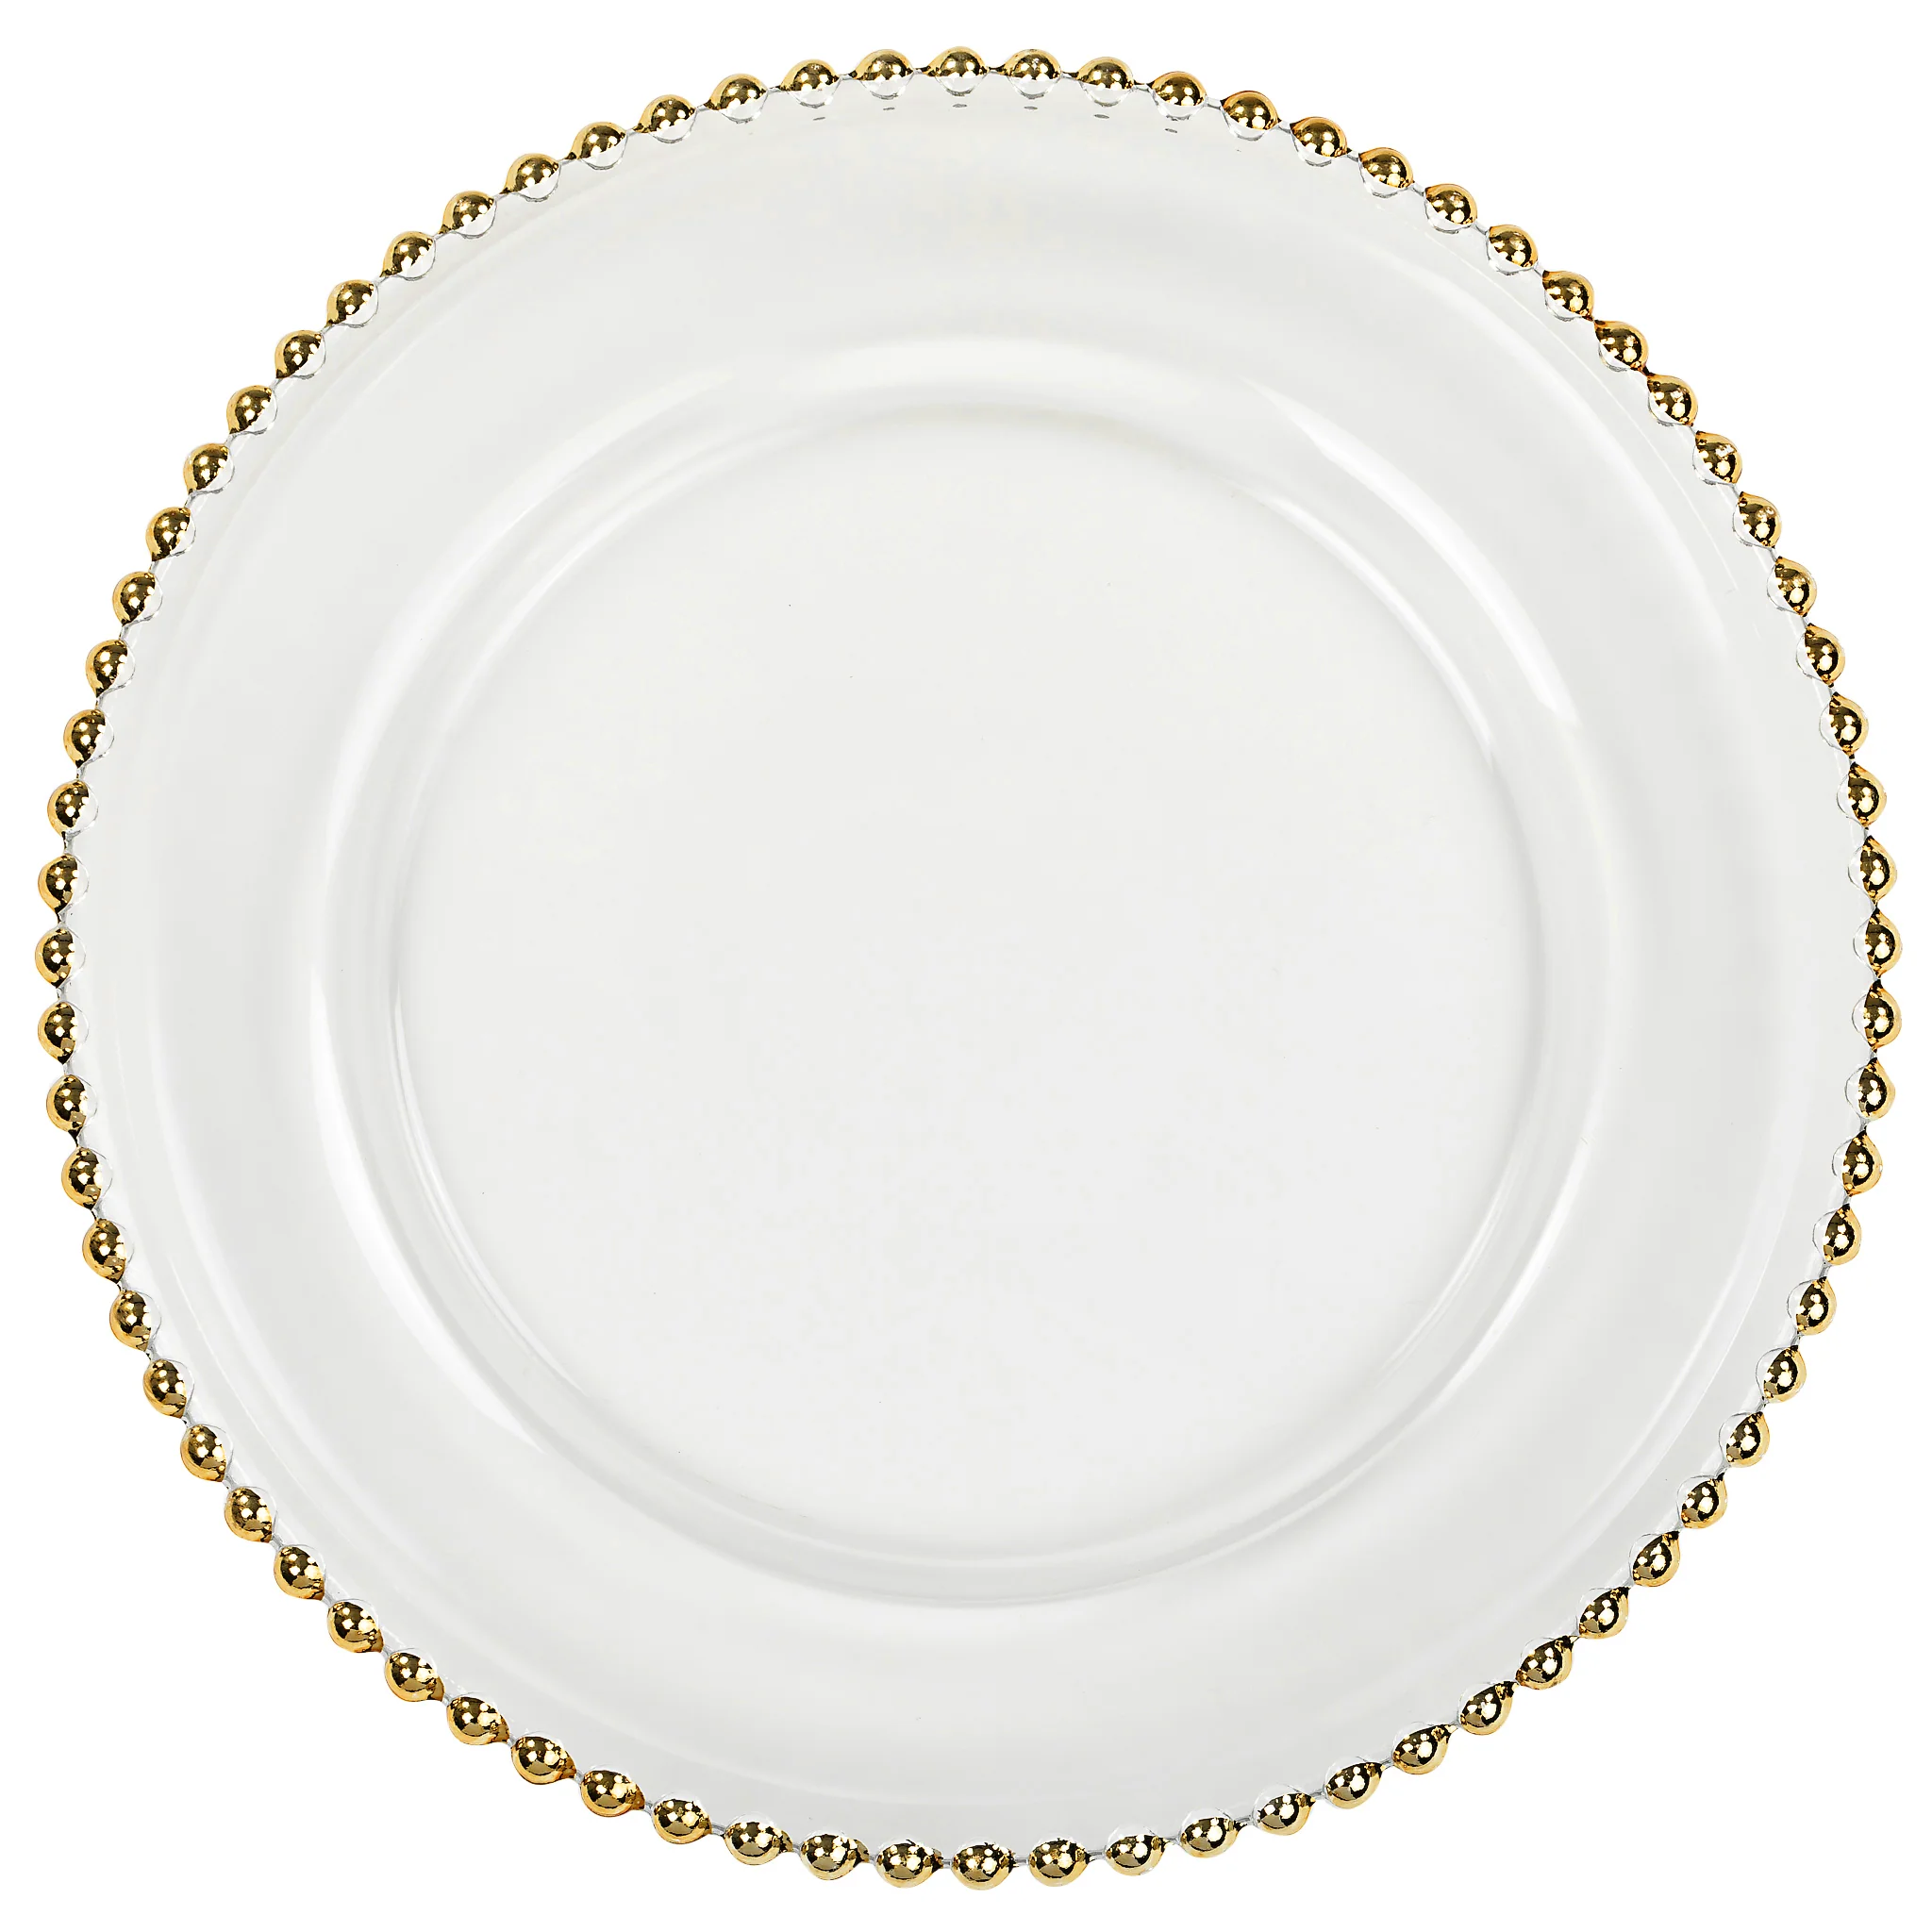  Gold Beaded Rim Glass Charger Plate - Party Rental by Royal Table Settings